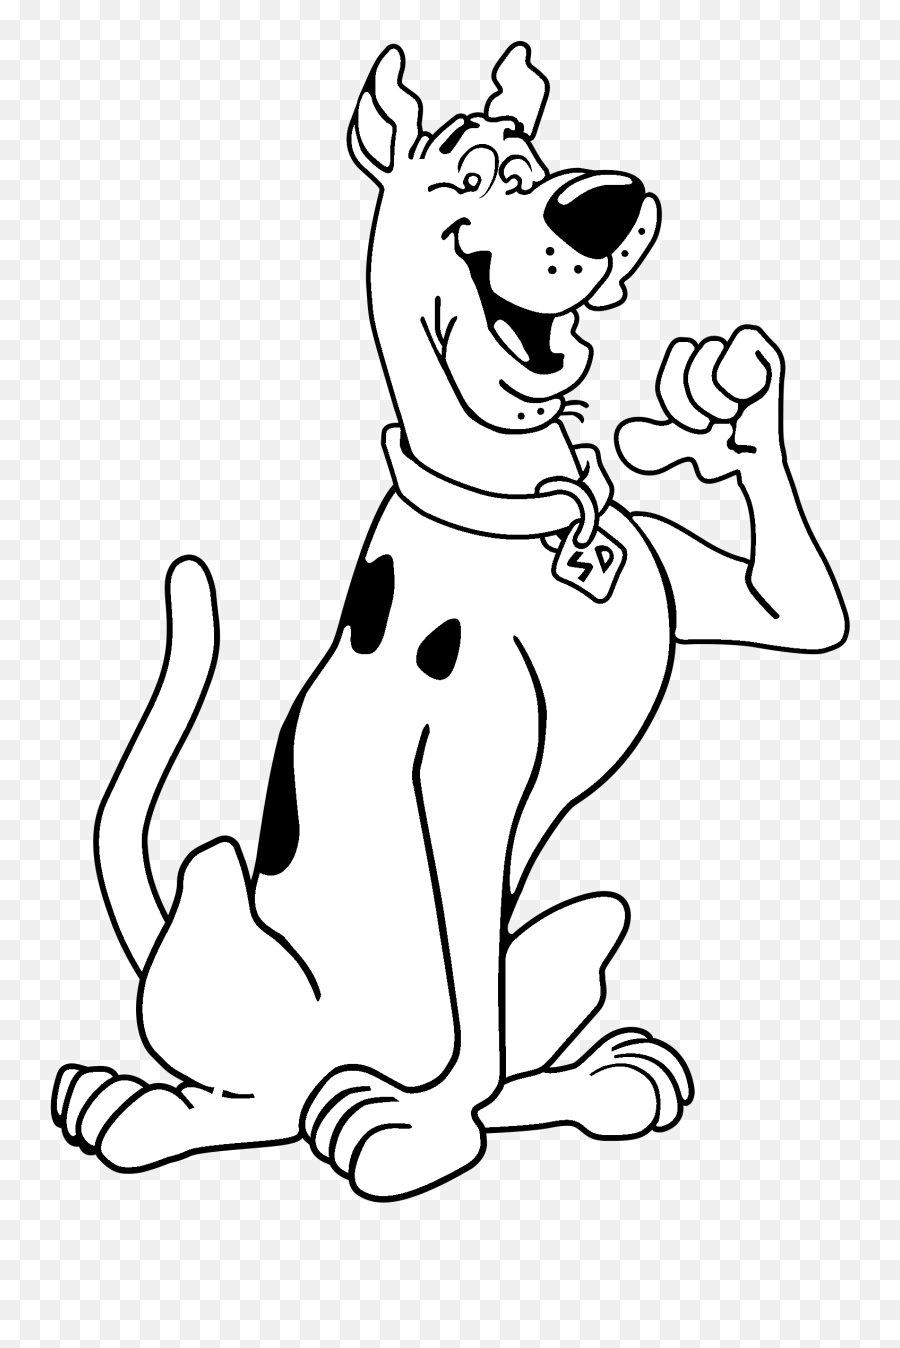 Scooby Doo Characters Png Image With No - Scooby Doo Images Black And White Emoji,Scooby Doo Logo